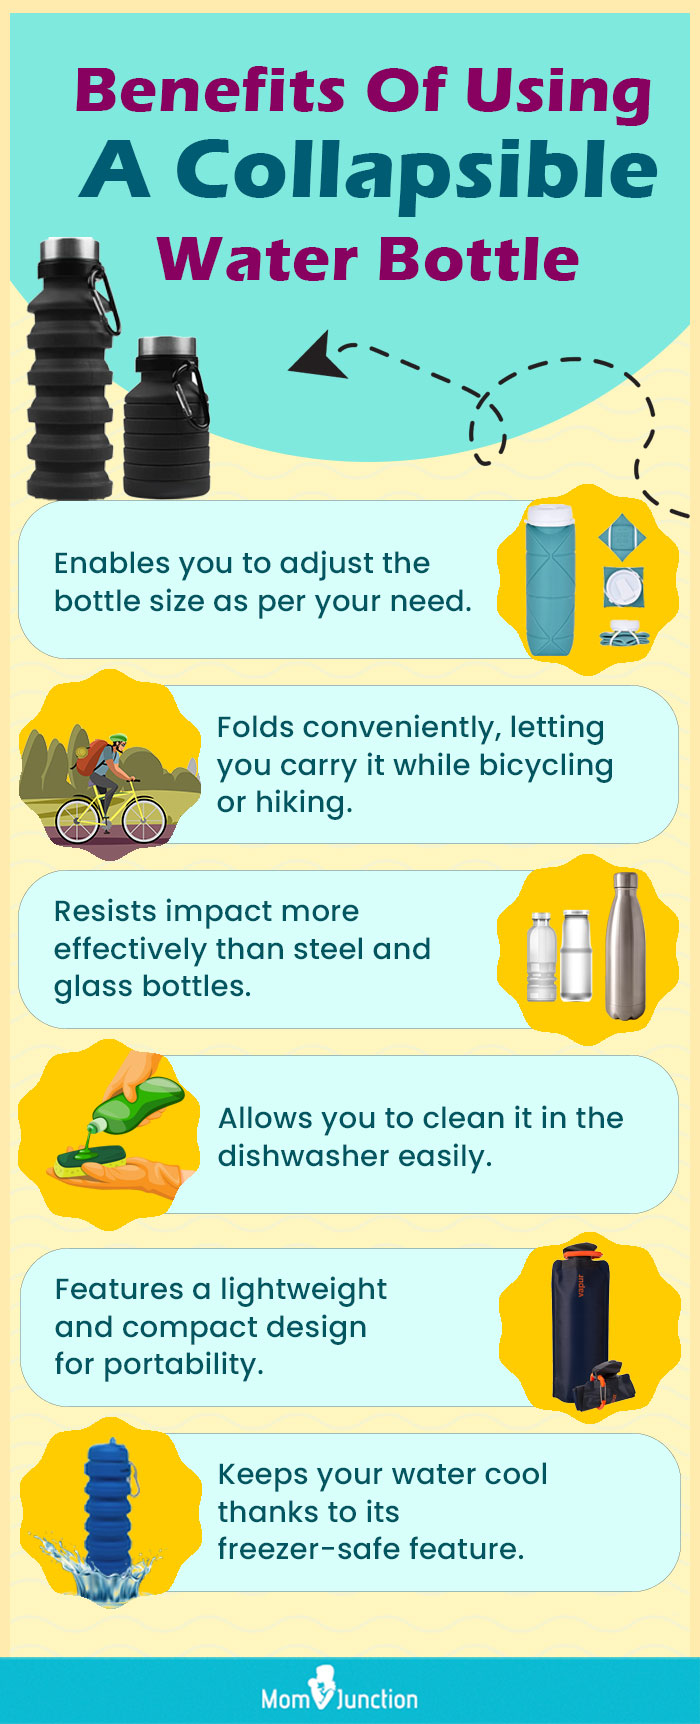 https://www.momjunction.com/wp-content/uploads/2023/05/Infographic-What-Are-The-Advantages-Of-Collapsible-Water-Bottles.jpg